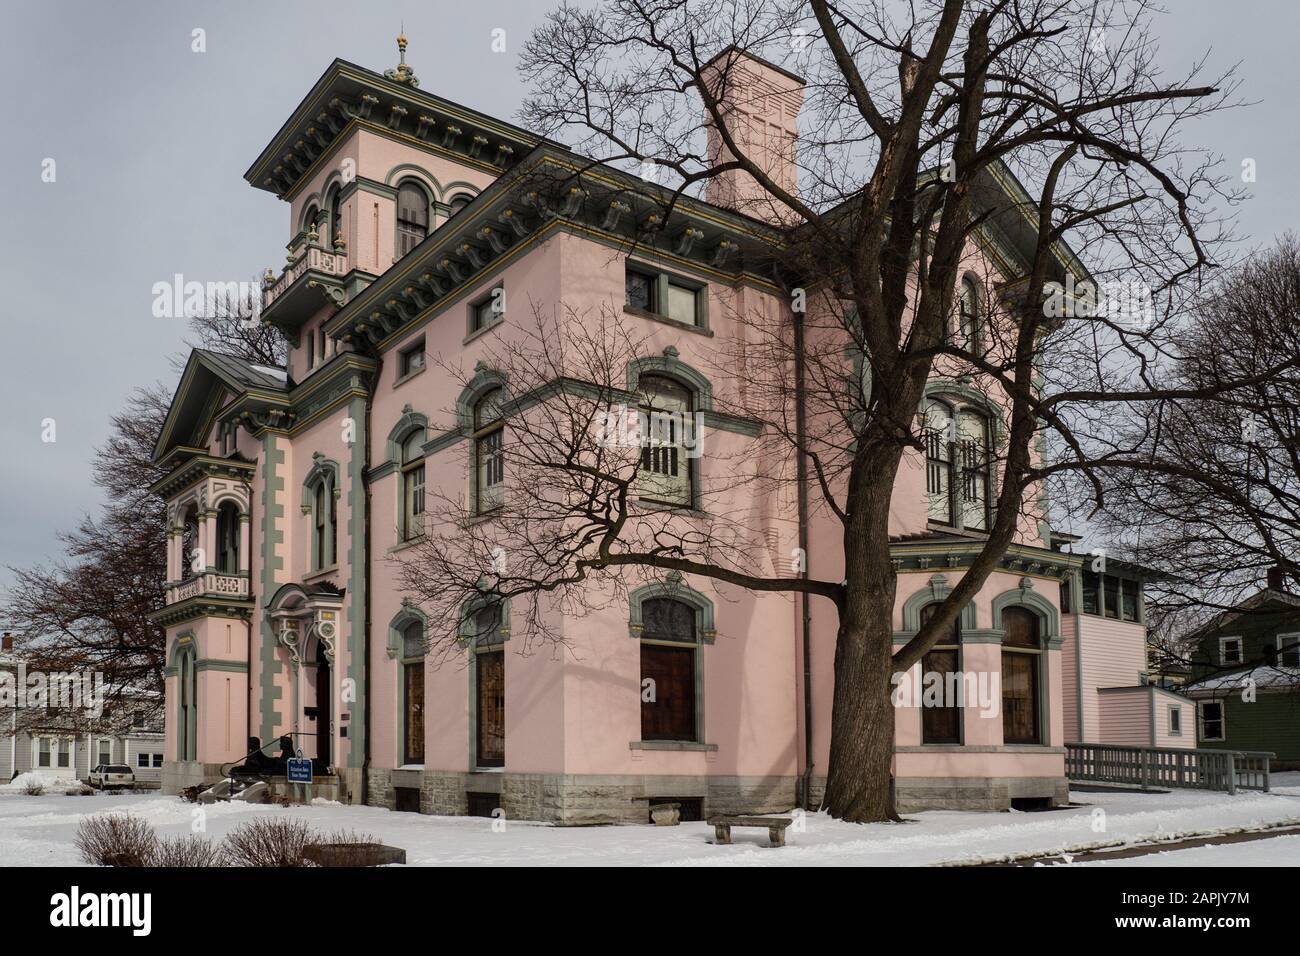 Oswego, New York, USA. January 23, 2020. View of the Richardson-Bates House Museum , an Italian Villa style mansion in the downtown district of the ci Stock Photo